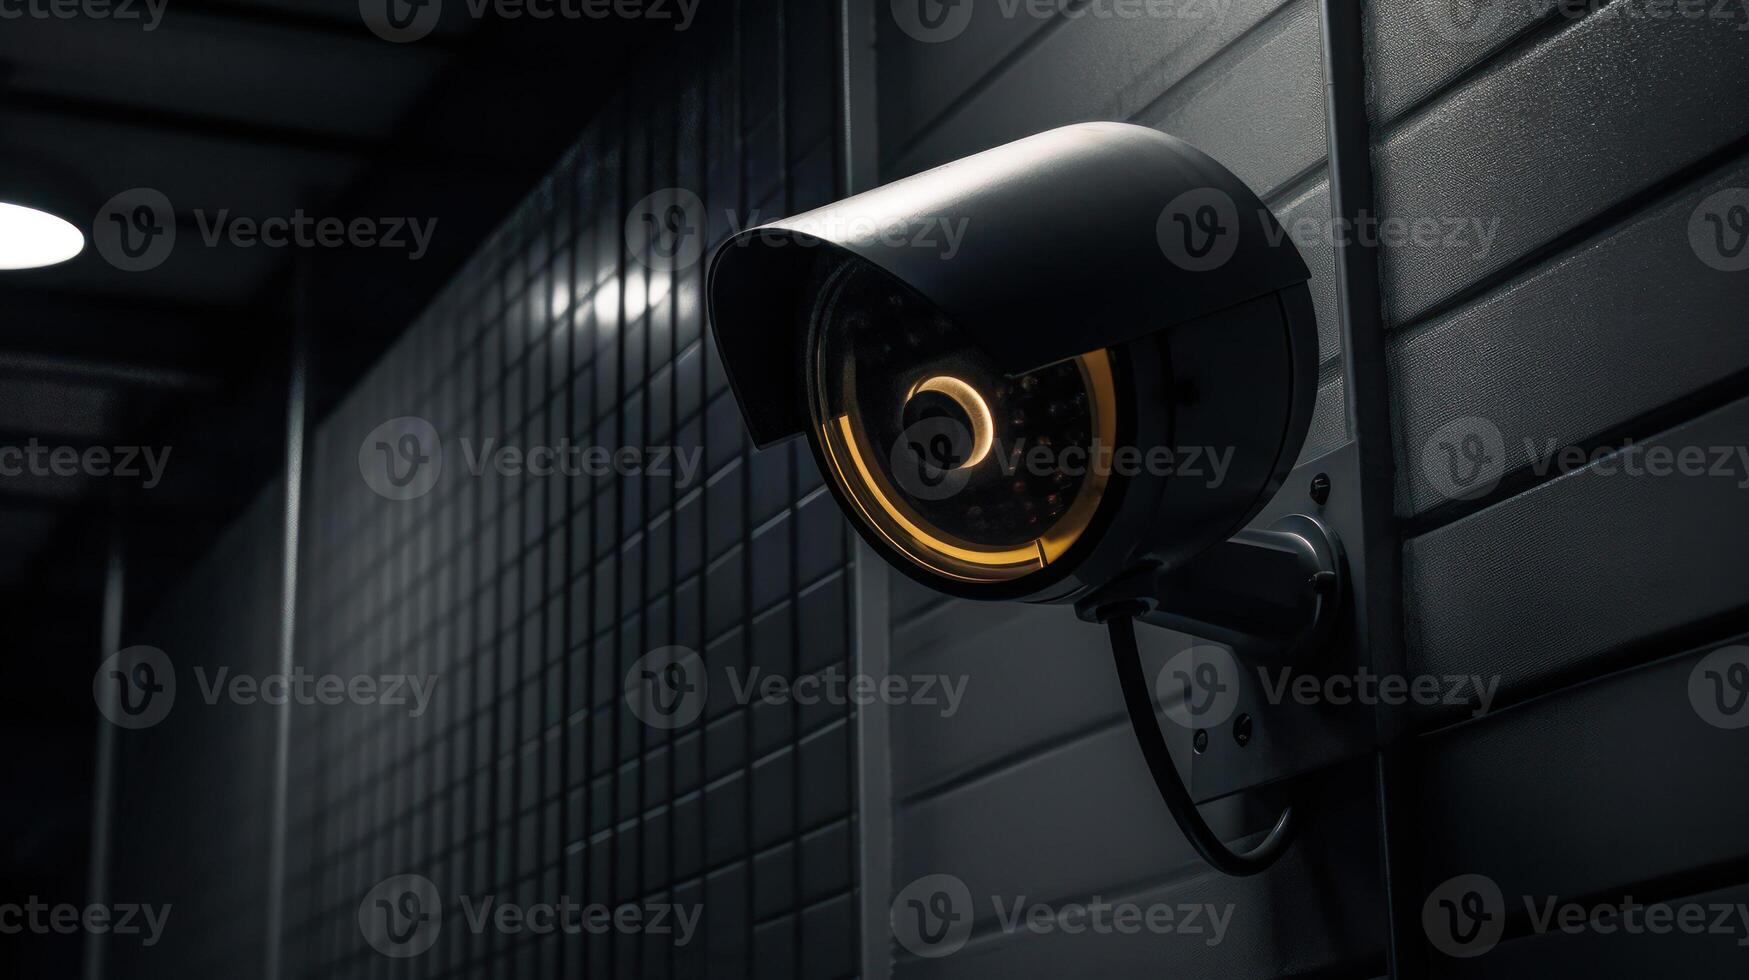 videcam for home security, modern security camera, photo